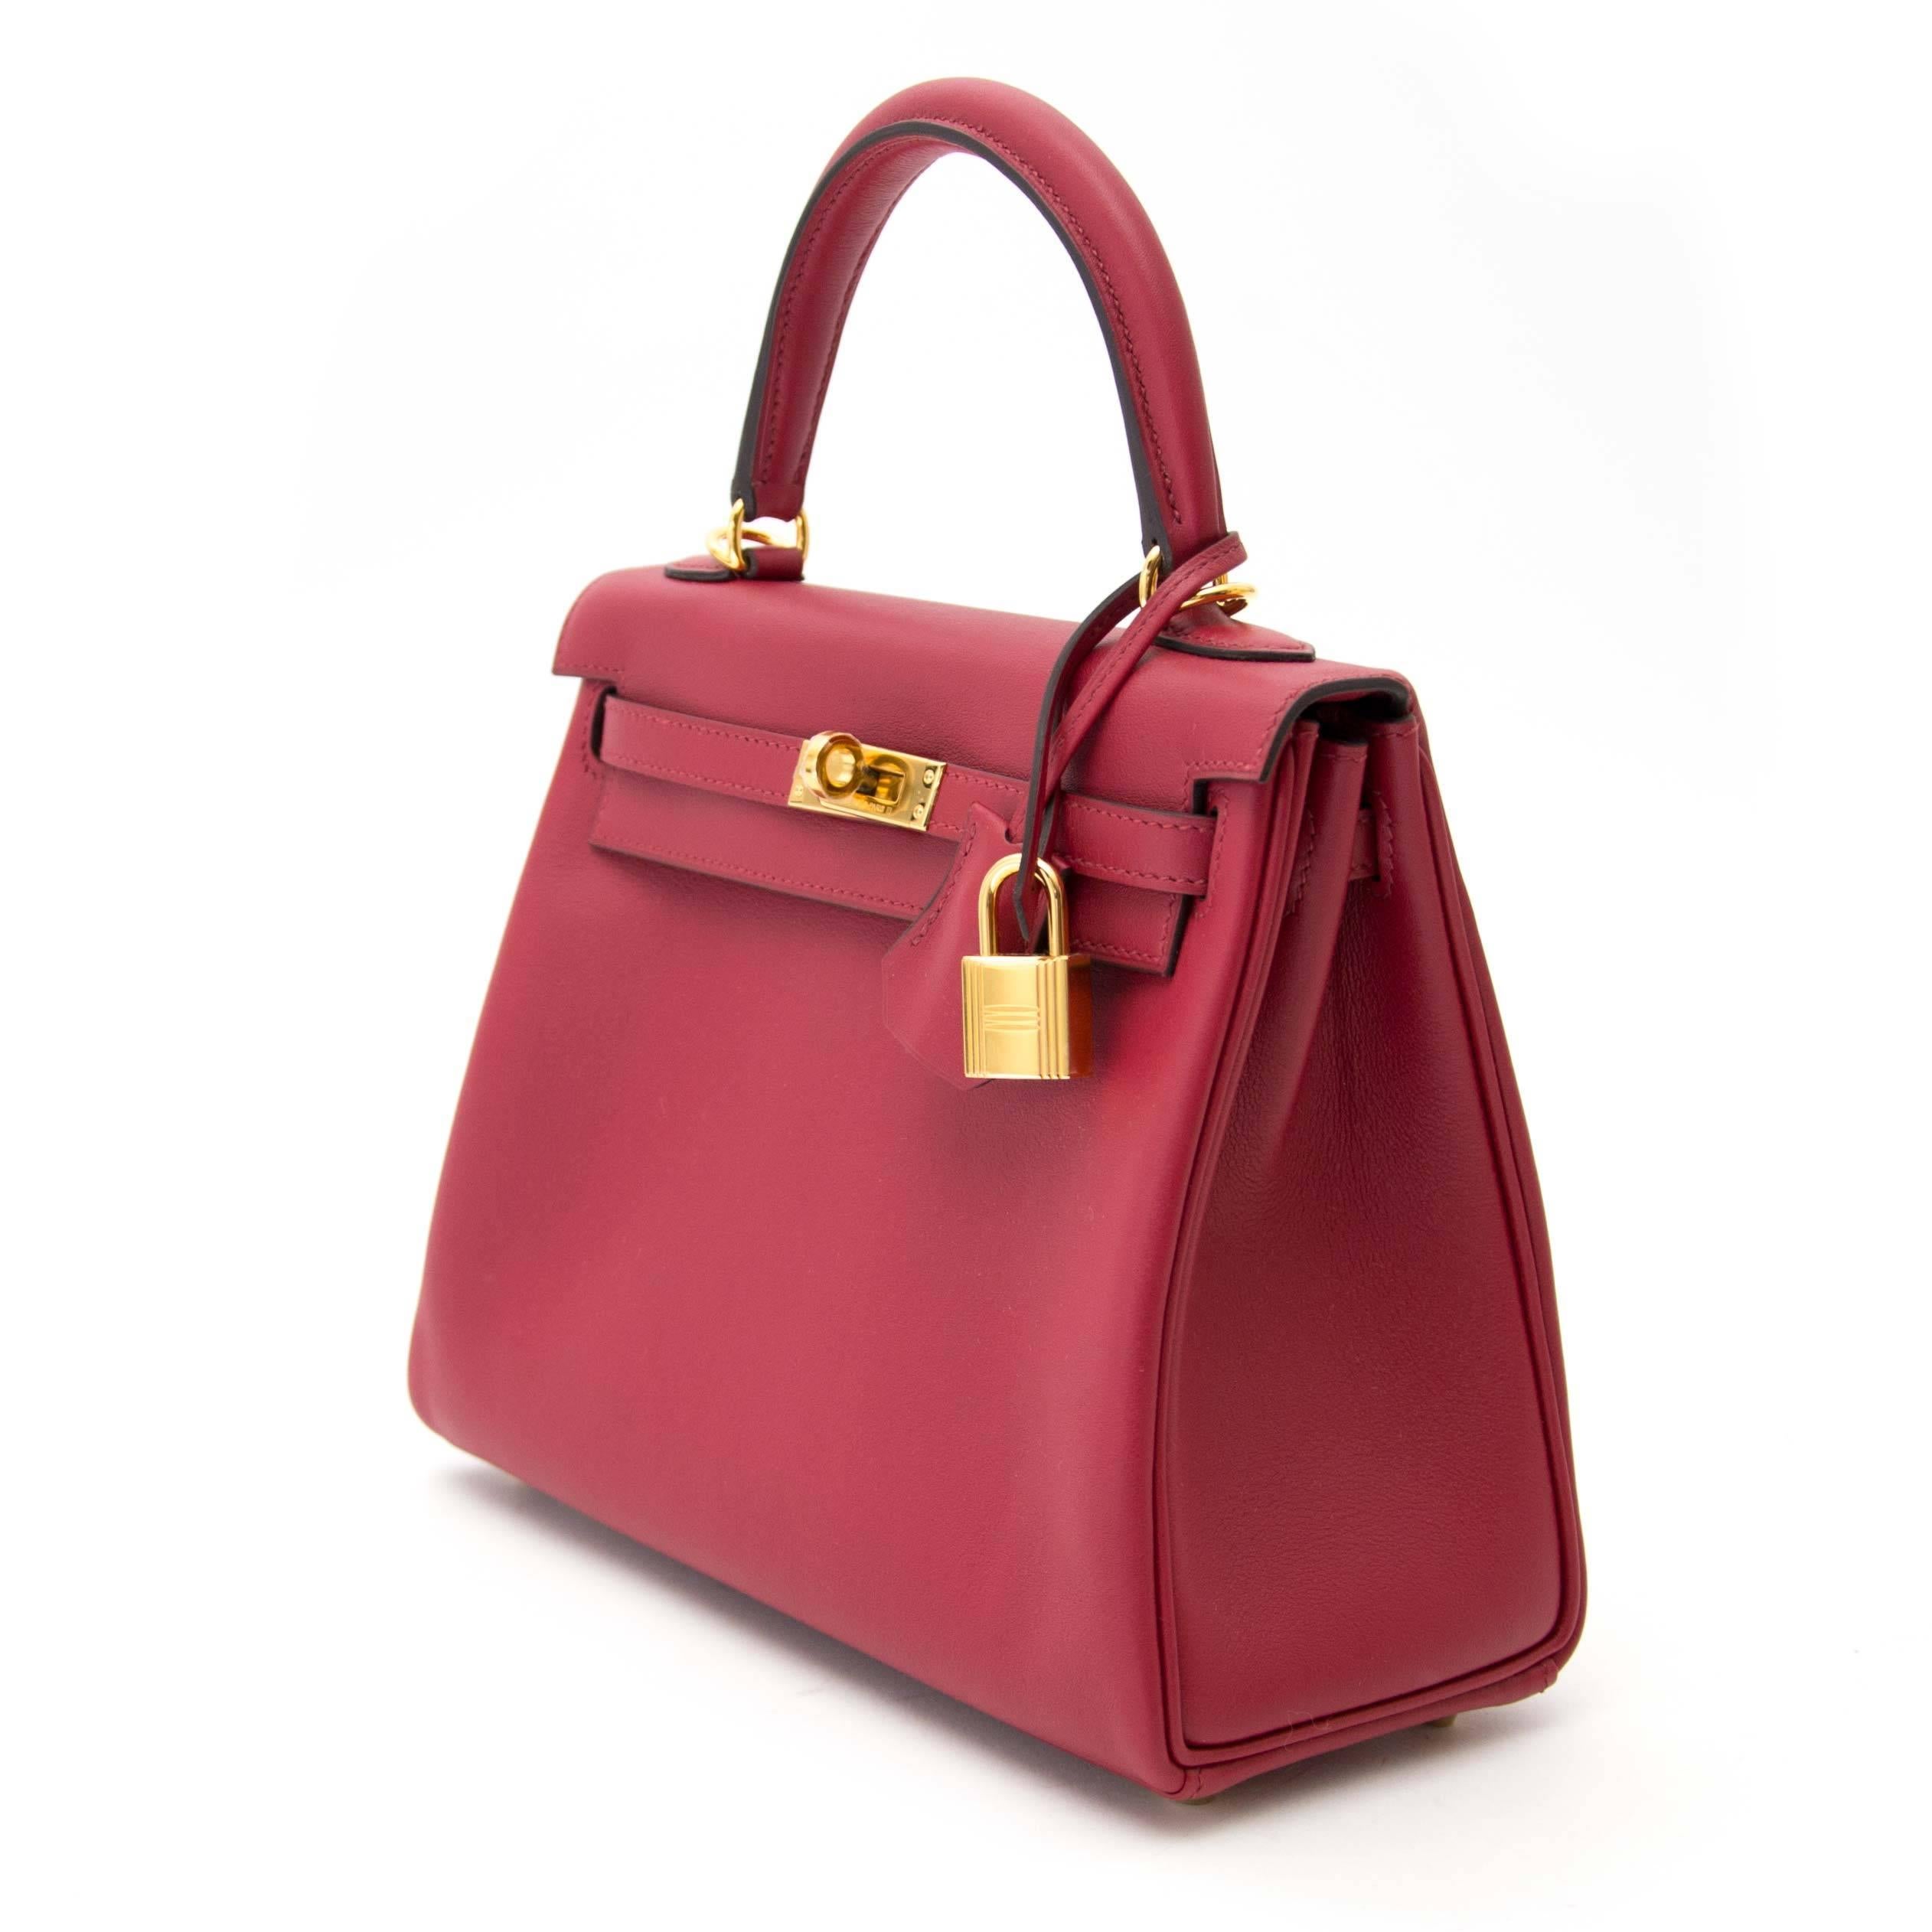 Never used 

 Never Used Hermes Kelly 25 Rouge Grenate GHW 

Never used Hermès Birkin bag in soft and smooth swift leather. The exquisite deep red Rouge Grenate color and gold tone hardware make each other pop!
 The size of this petite Hermès Kelly